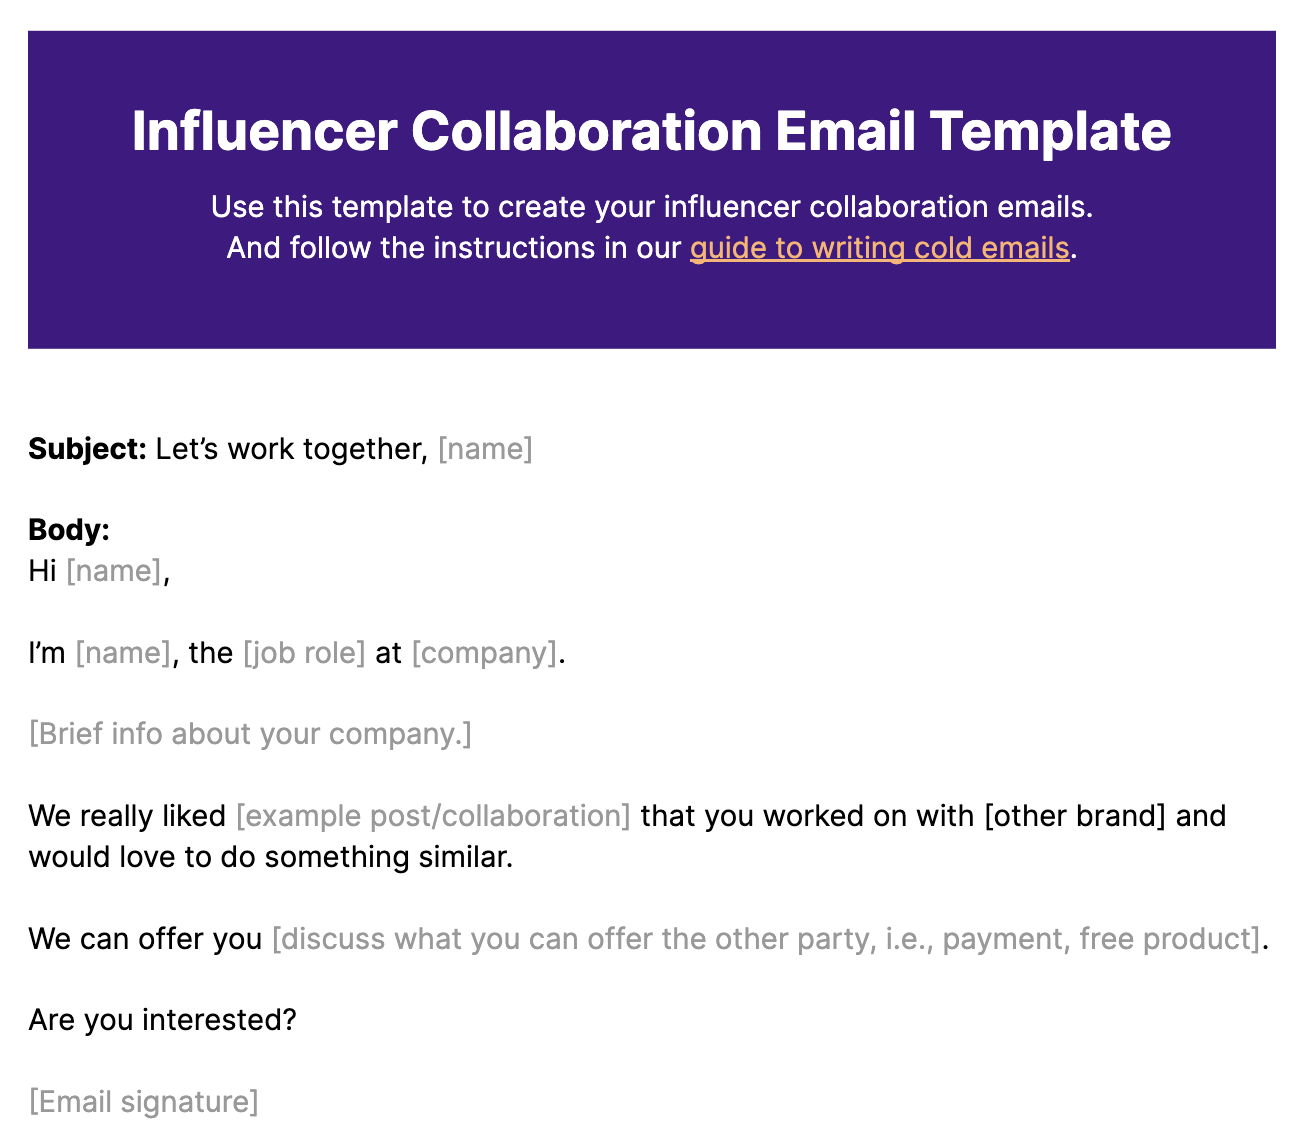 Influencer Collaboration Email Template